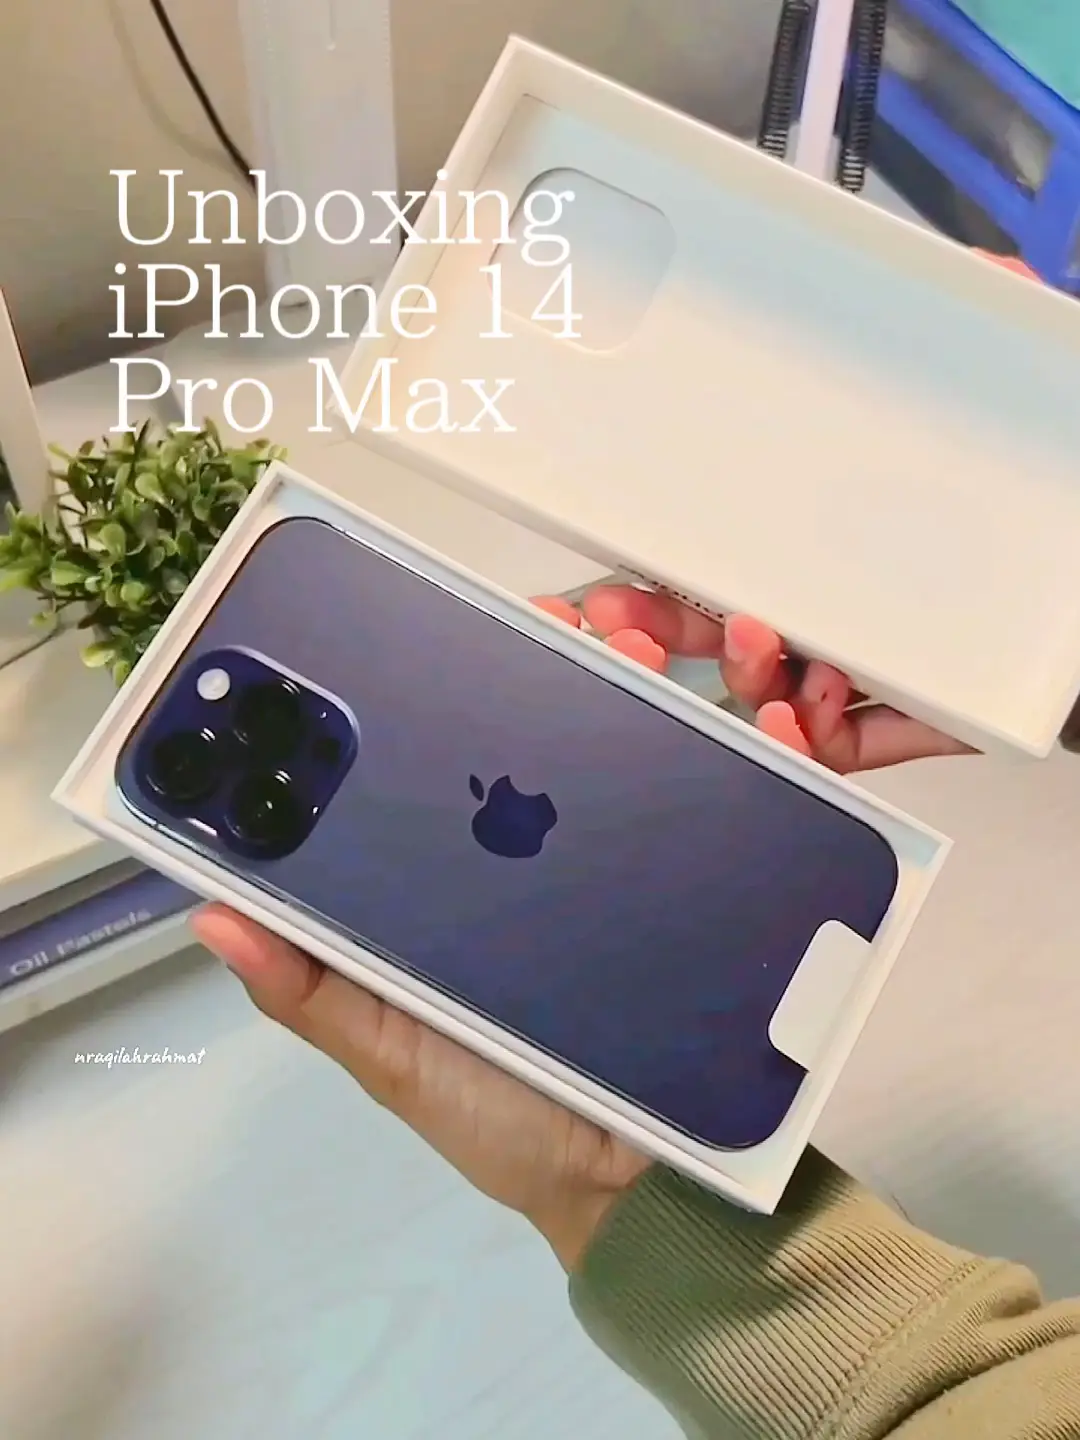 iPhone 14 Pro Max in Space Black 🖤(256GB) unboxing 📦 Set Up